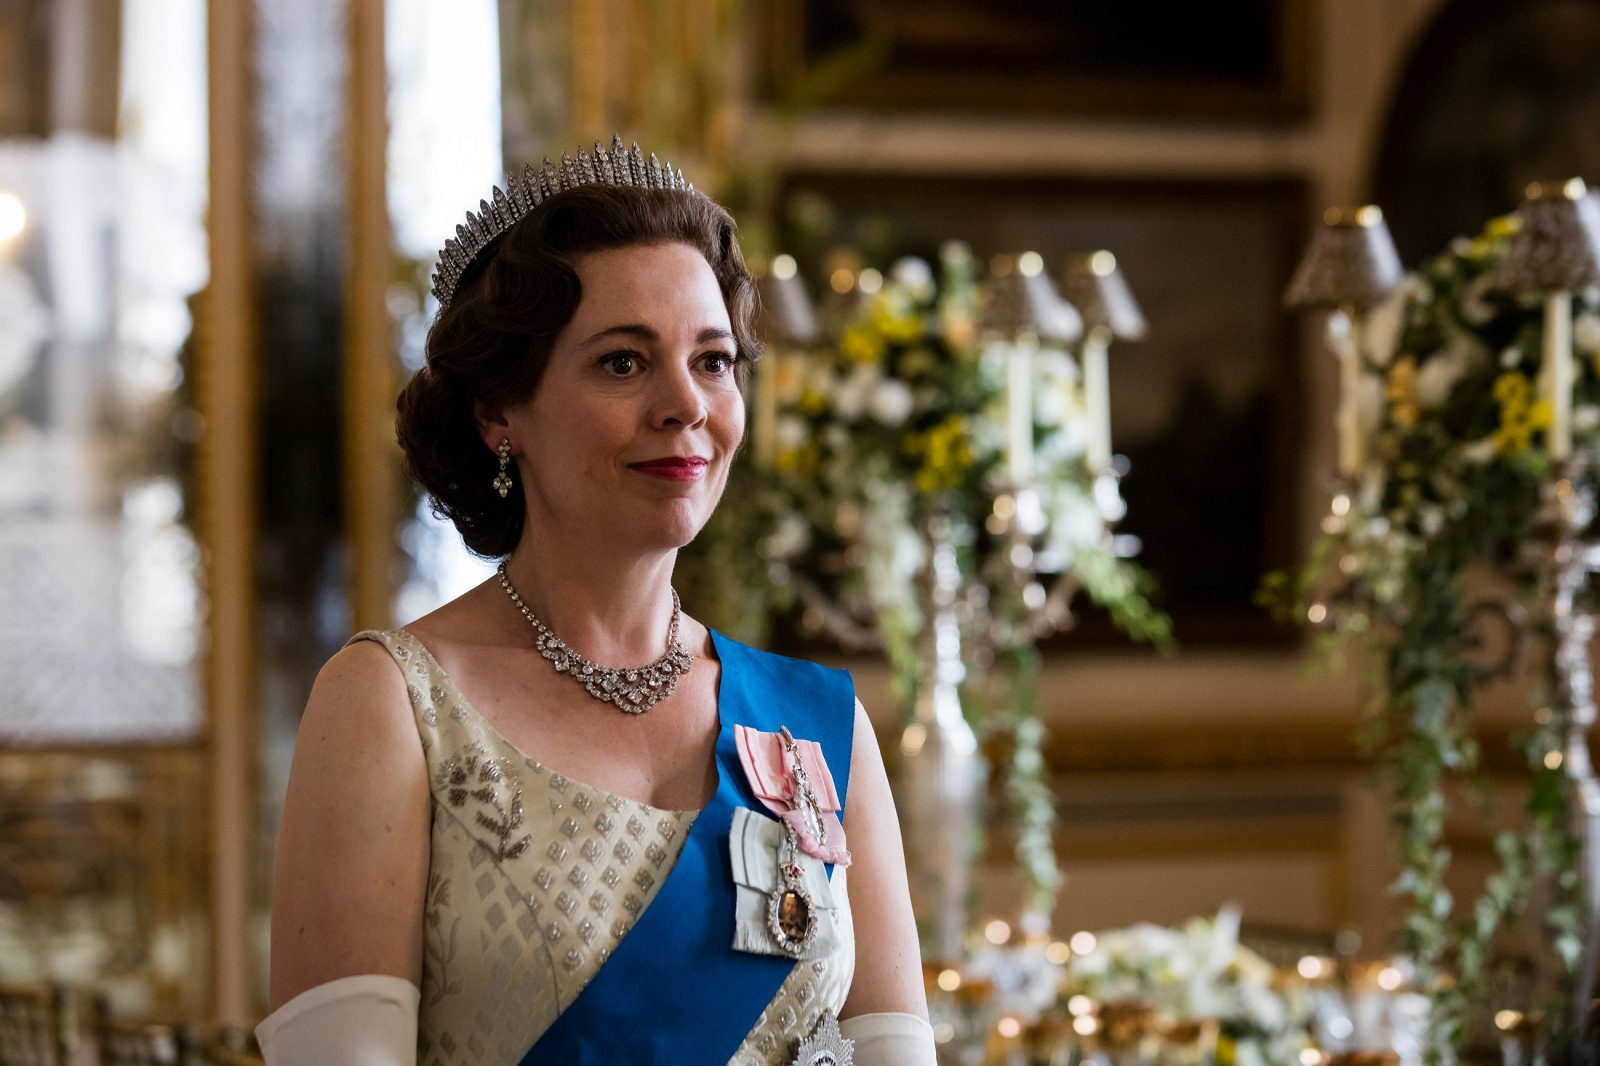 Remove 1 Character from These Famous TV Shows to Find Out What Award You’ll Win The Crown Olivia Colman